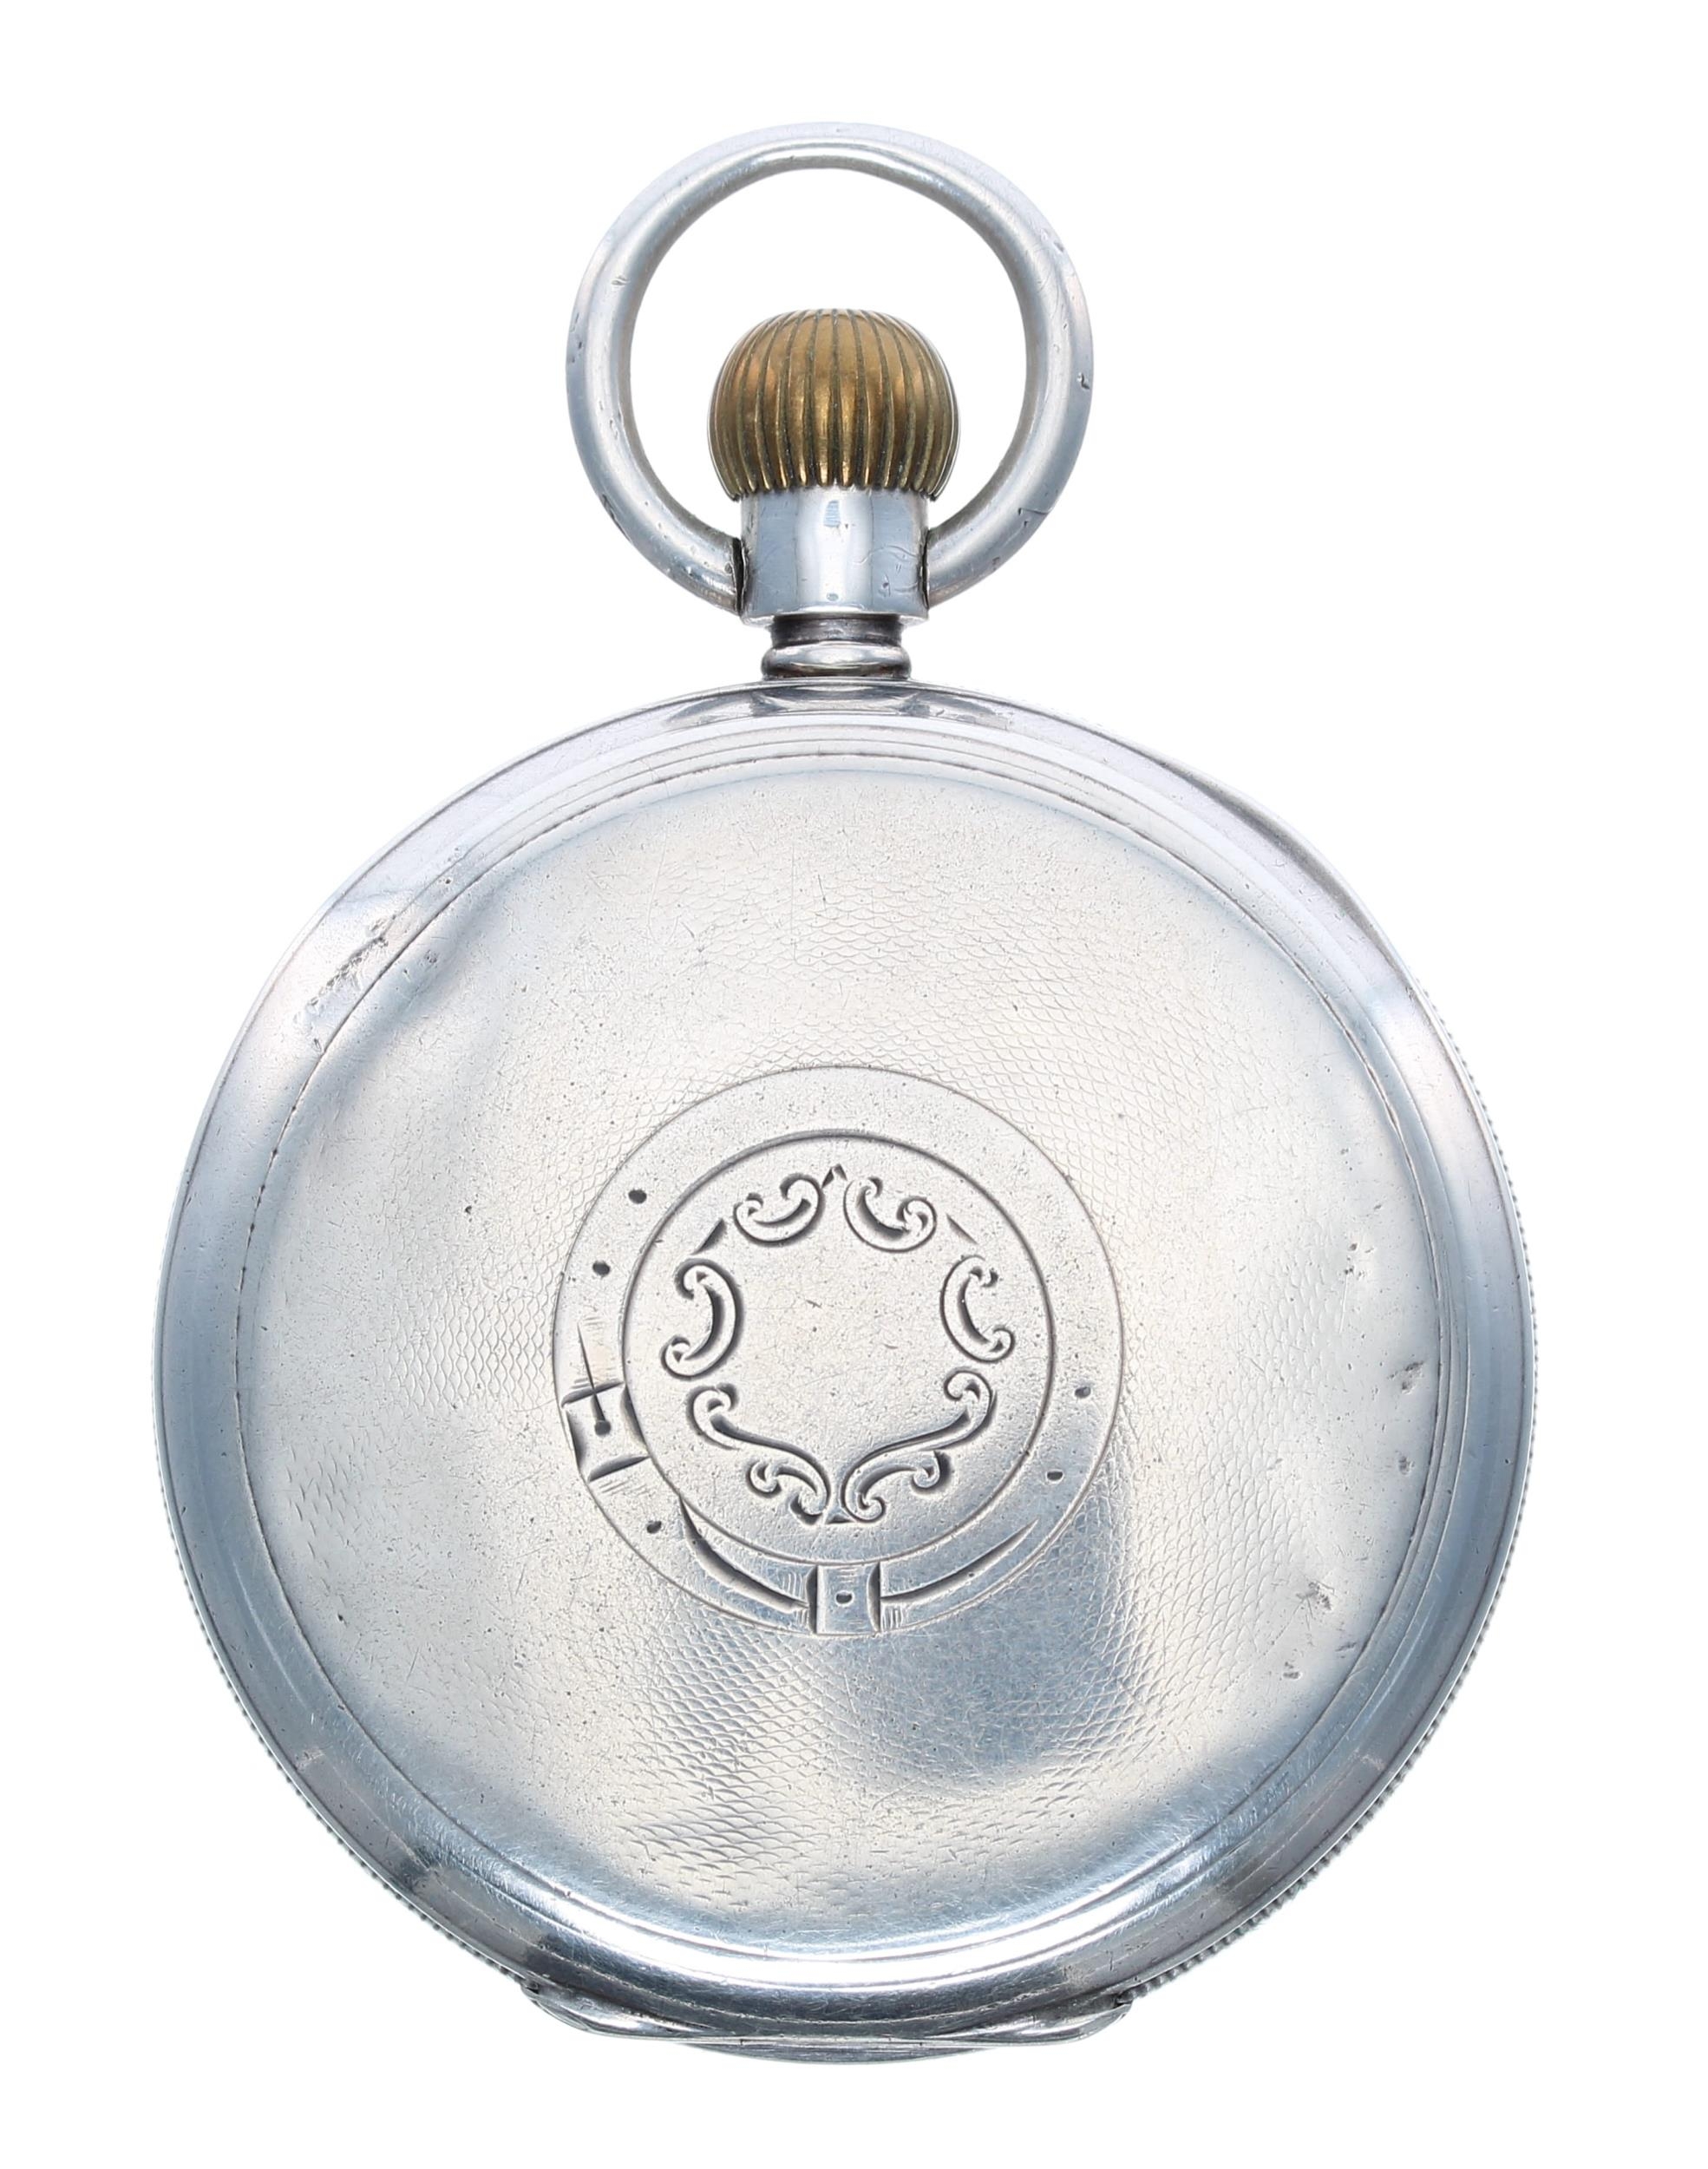 American Waltham 'Riverside' silver lever pocket watch, circa 1895, signed movement, no. 7342758, - Image 3 of 3